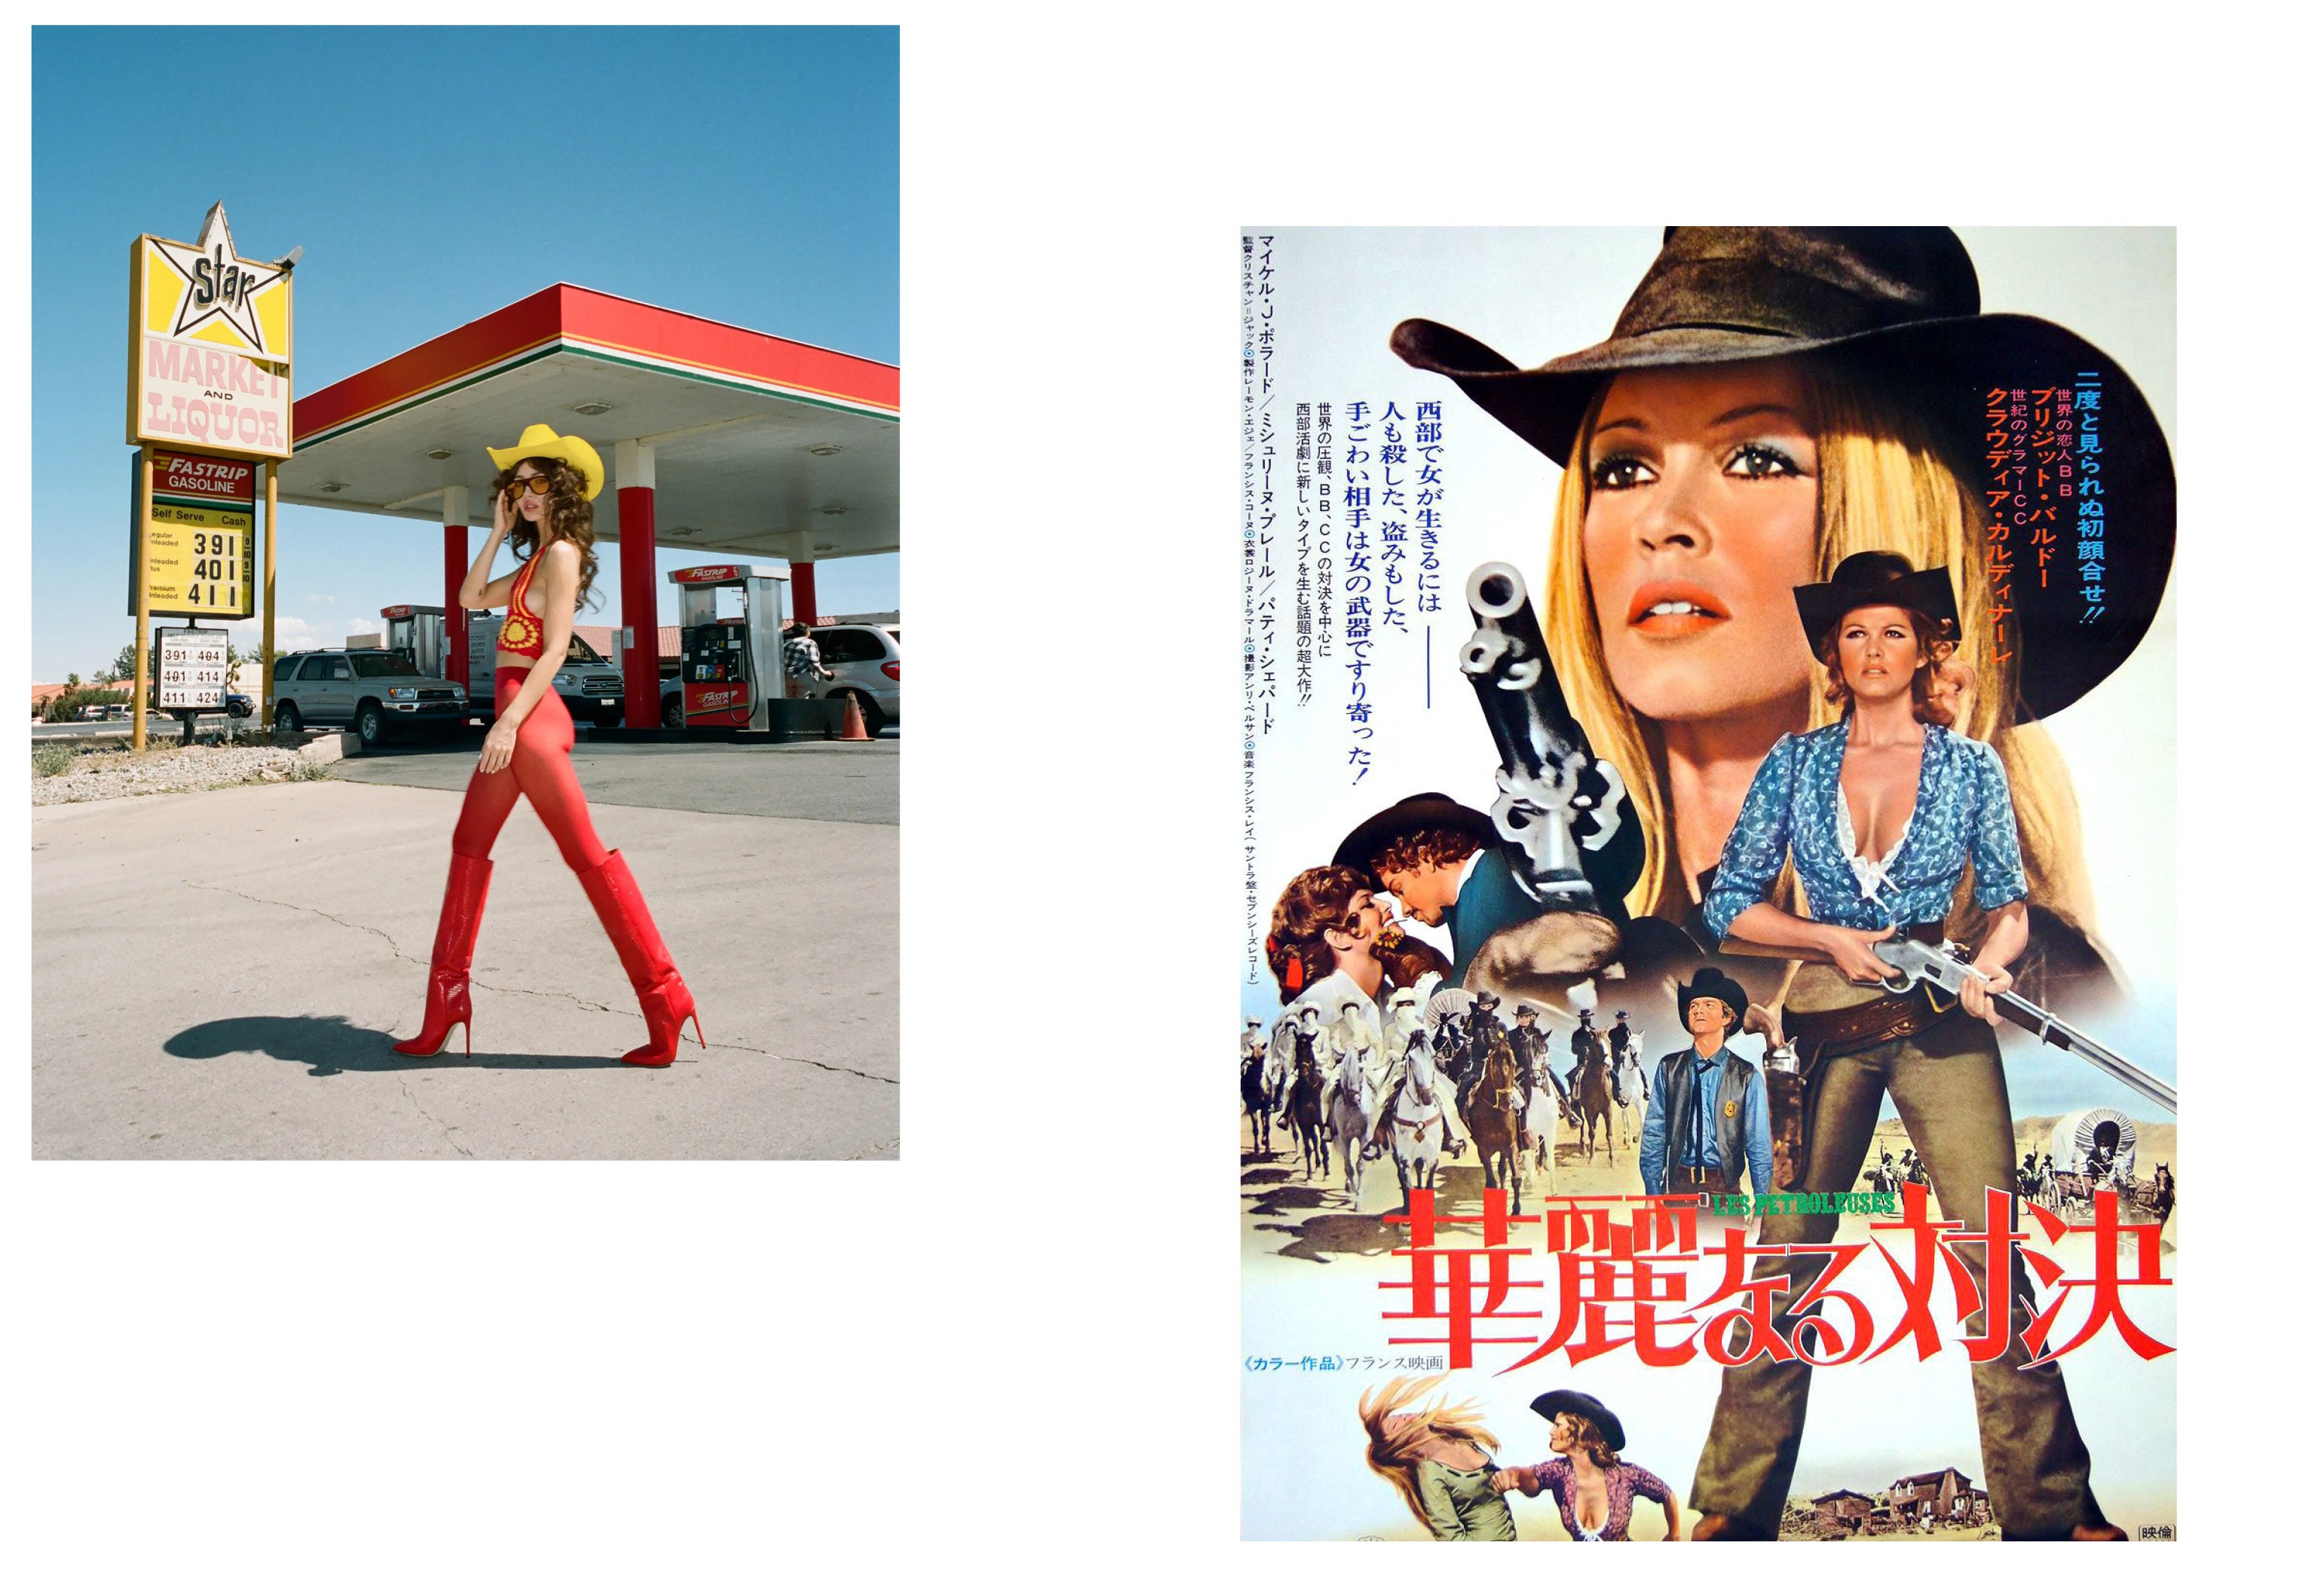 From left to right: Nadia Lee Cohen in the Paris Texas FW 21 campaign; Japanese poster for The Legend of Frenchie King, 1971.